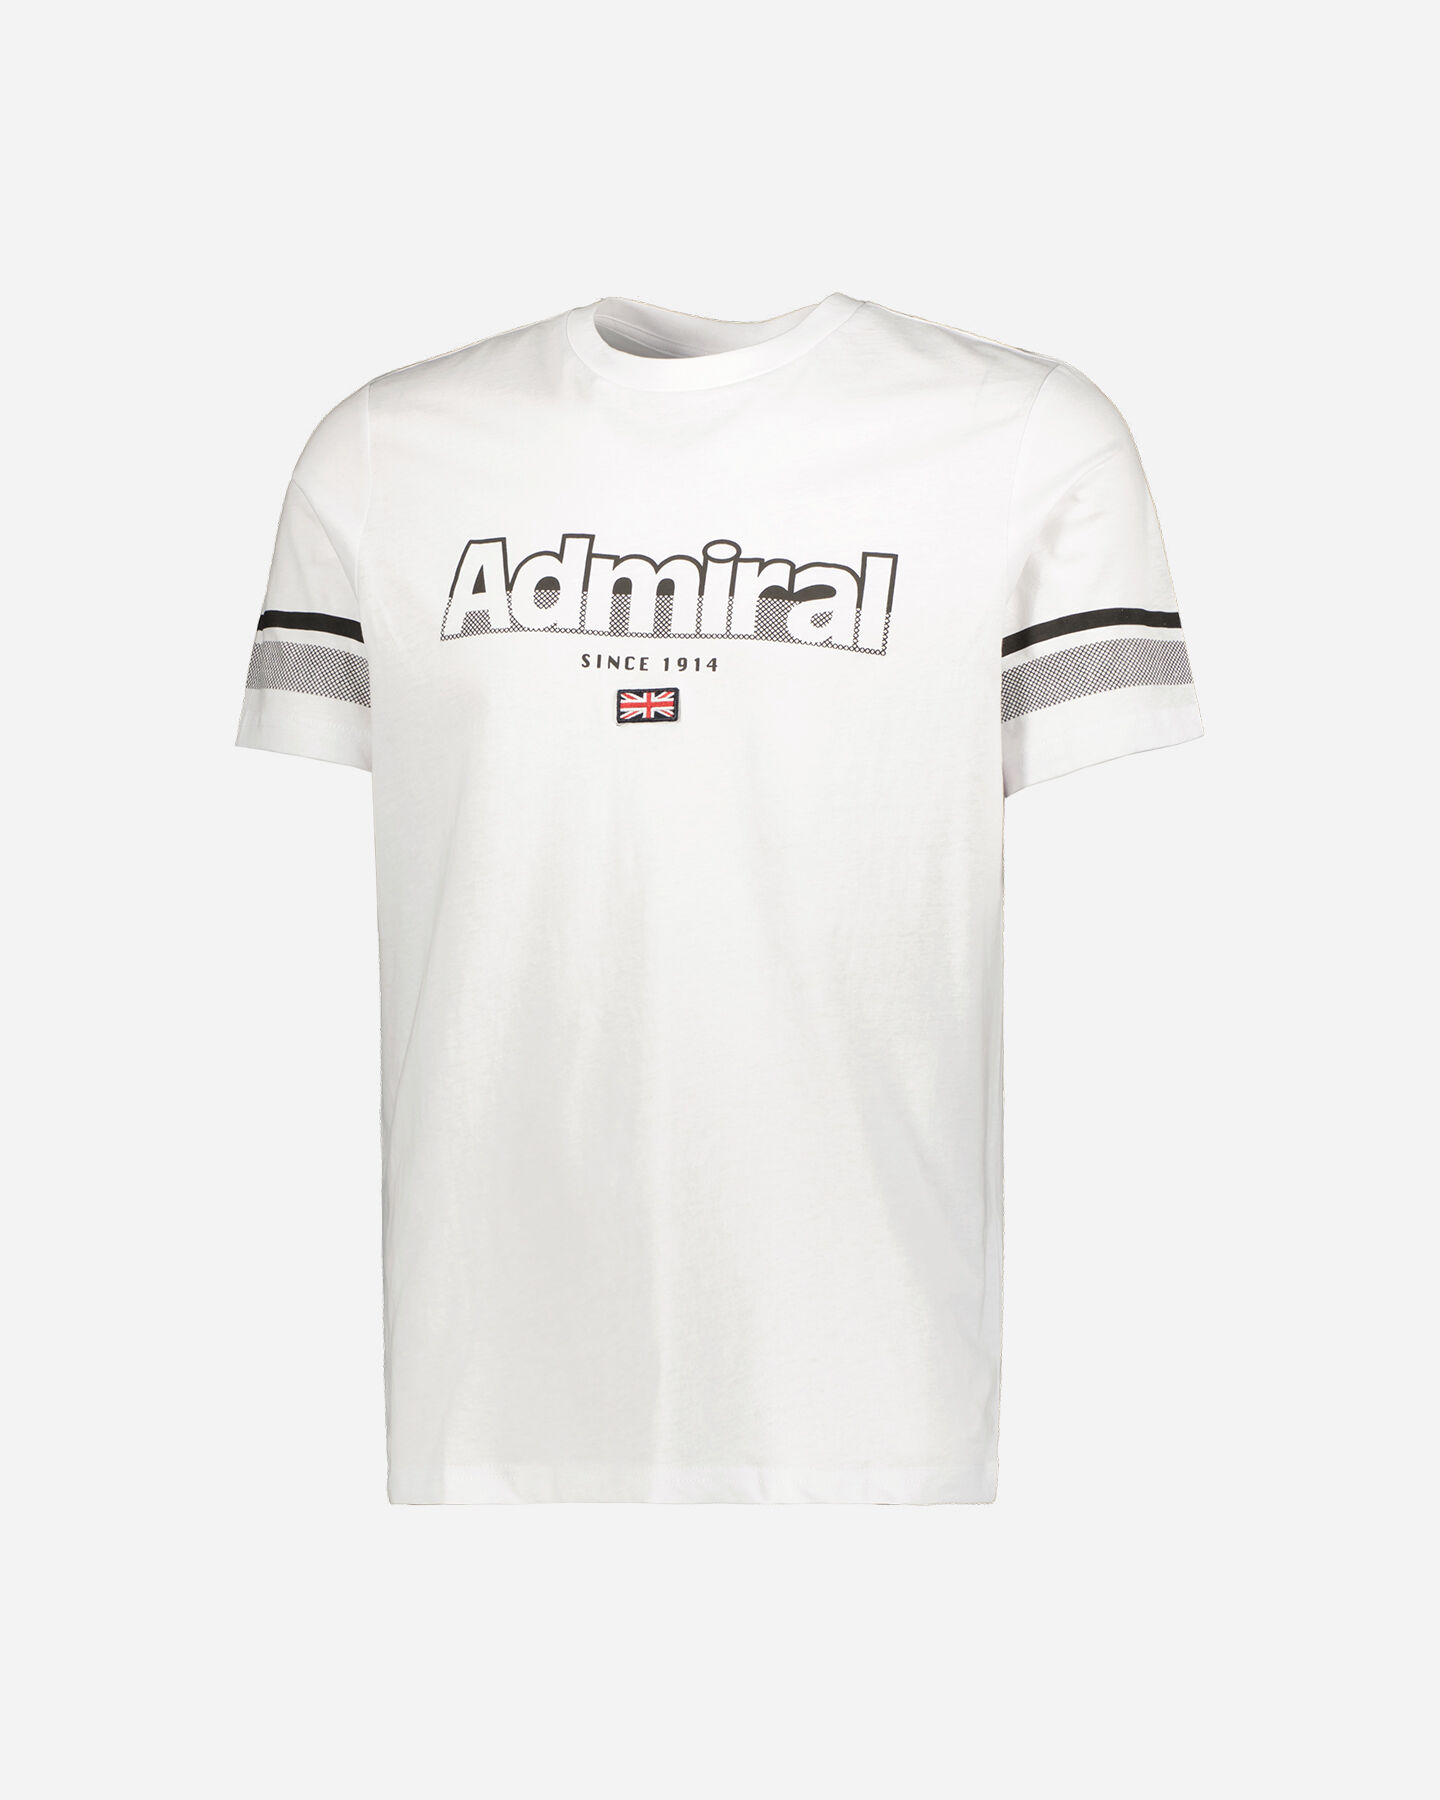  T-Shirt ADMIRAL GRAPHIC LOGO M S4100981|001|XS scatto 0